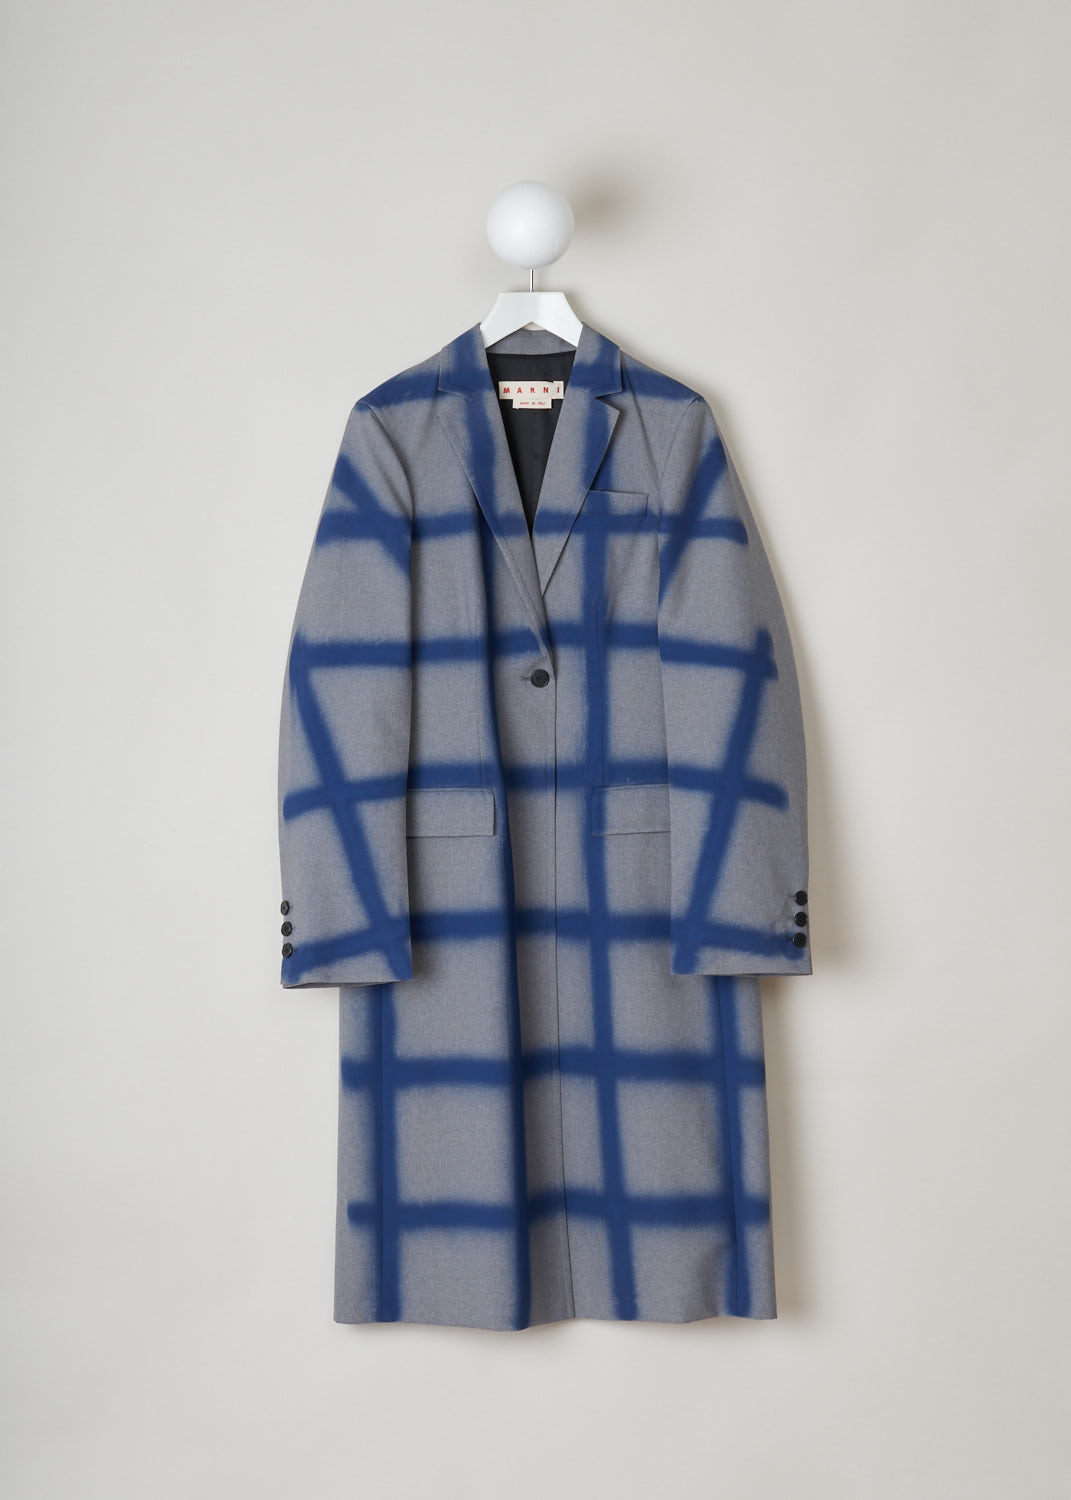 Marni, Checkered overcoat in grey and blue, CPMA0145U6_USCR90_SCB65, blue grey, front, Knee-long overcoat featuring a blue checkered design on a grey background. The collar that leads into the notched lapel, going further down you will find a single buttoned fastening option. Comes long sleeves supporting three buttons. Furthermore the back of this model is left monotone to emphasize the front. Two flap pockets can be found on the front. 